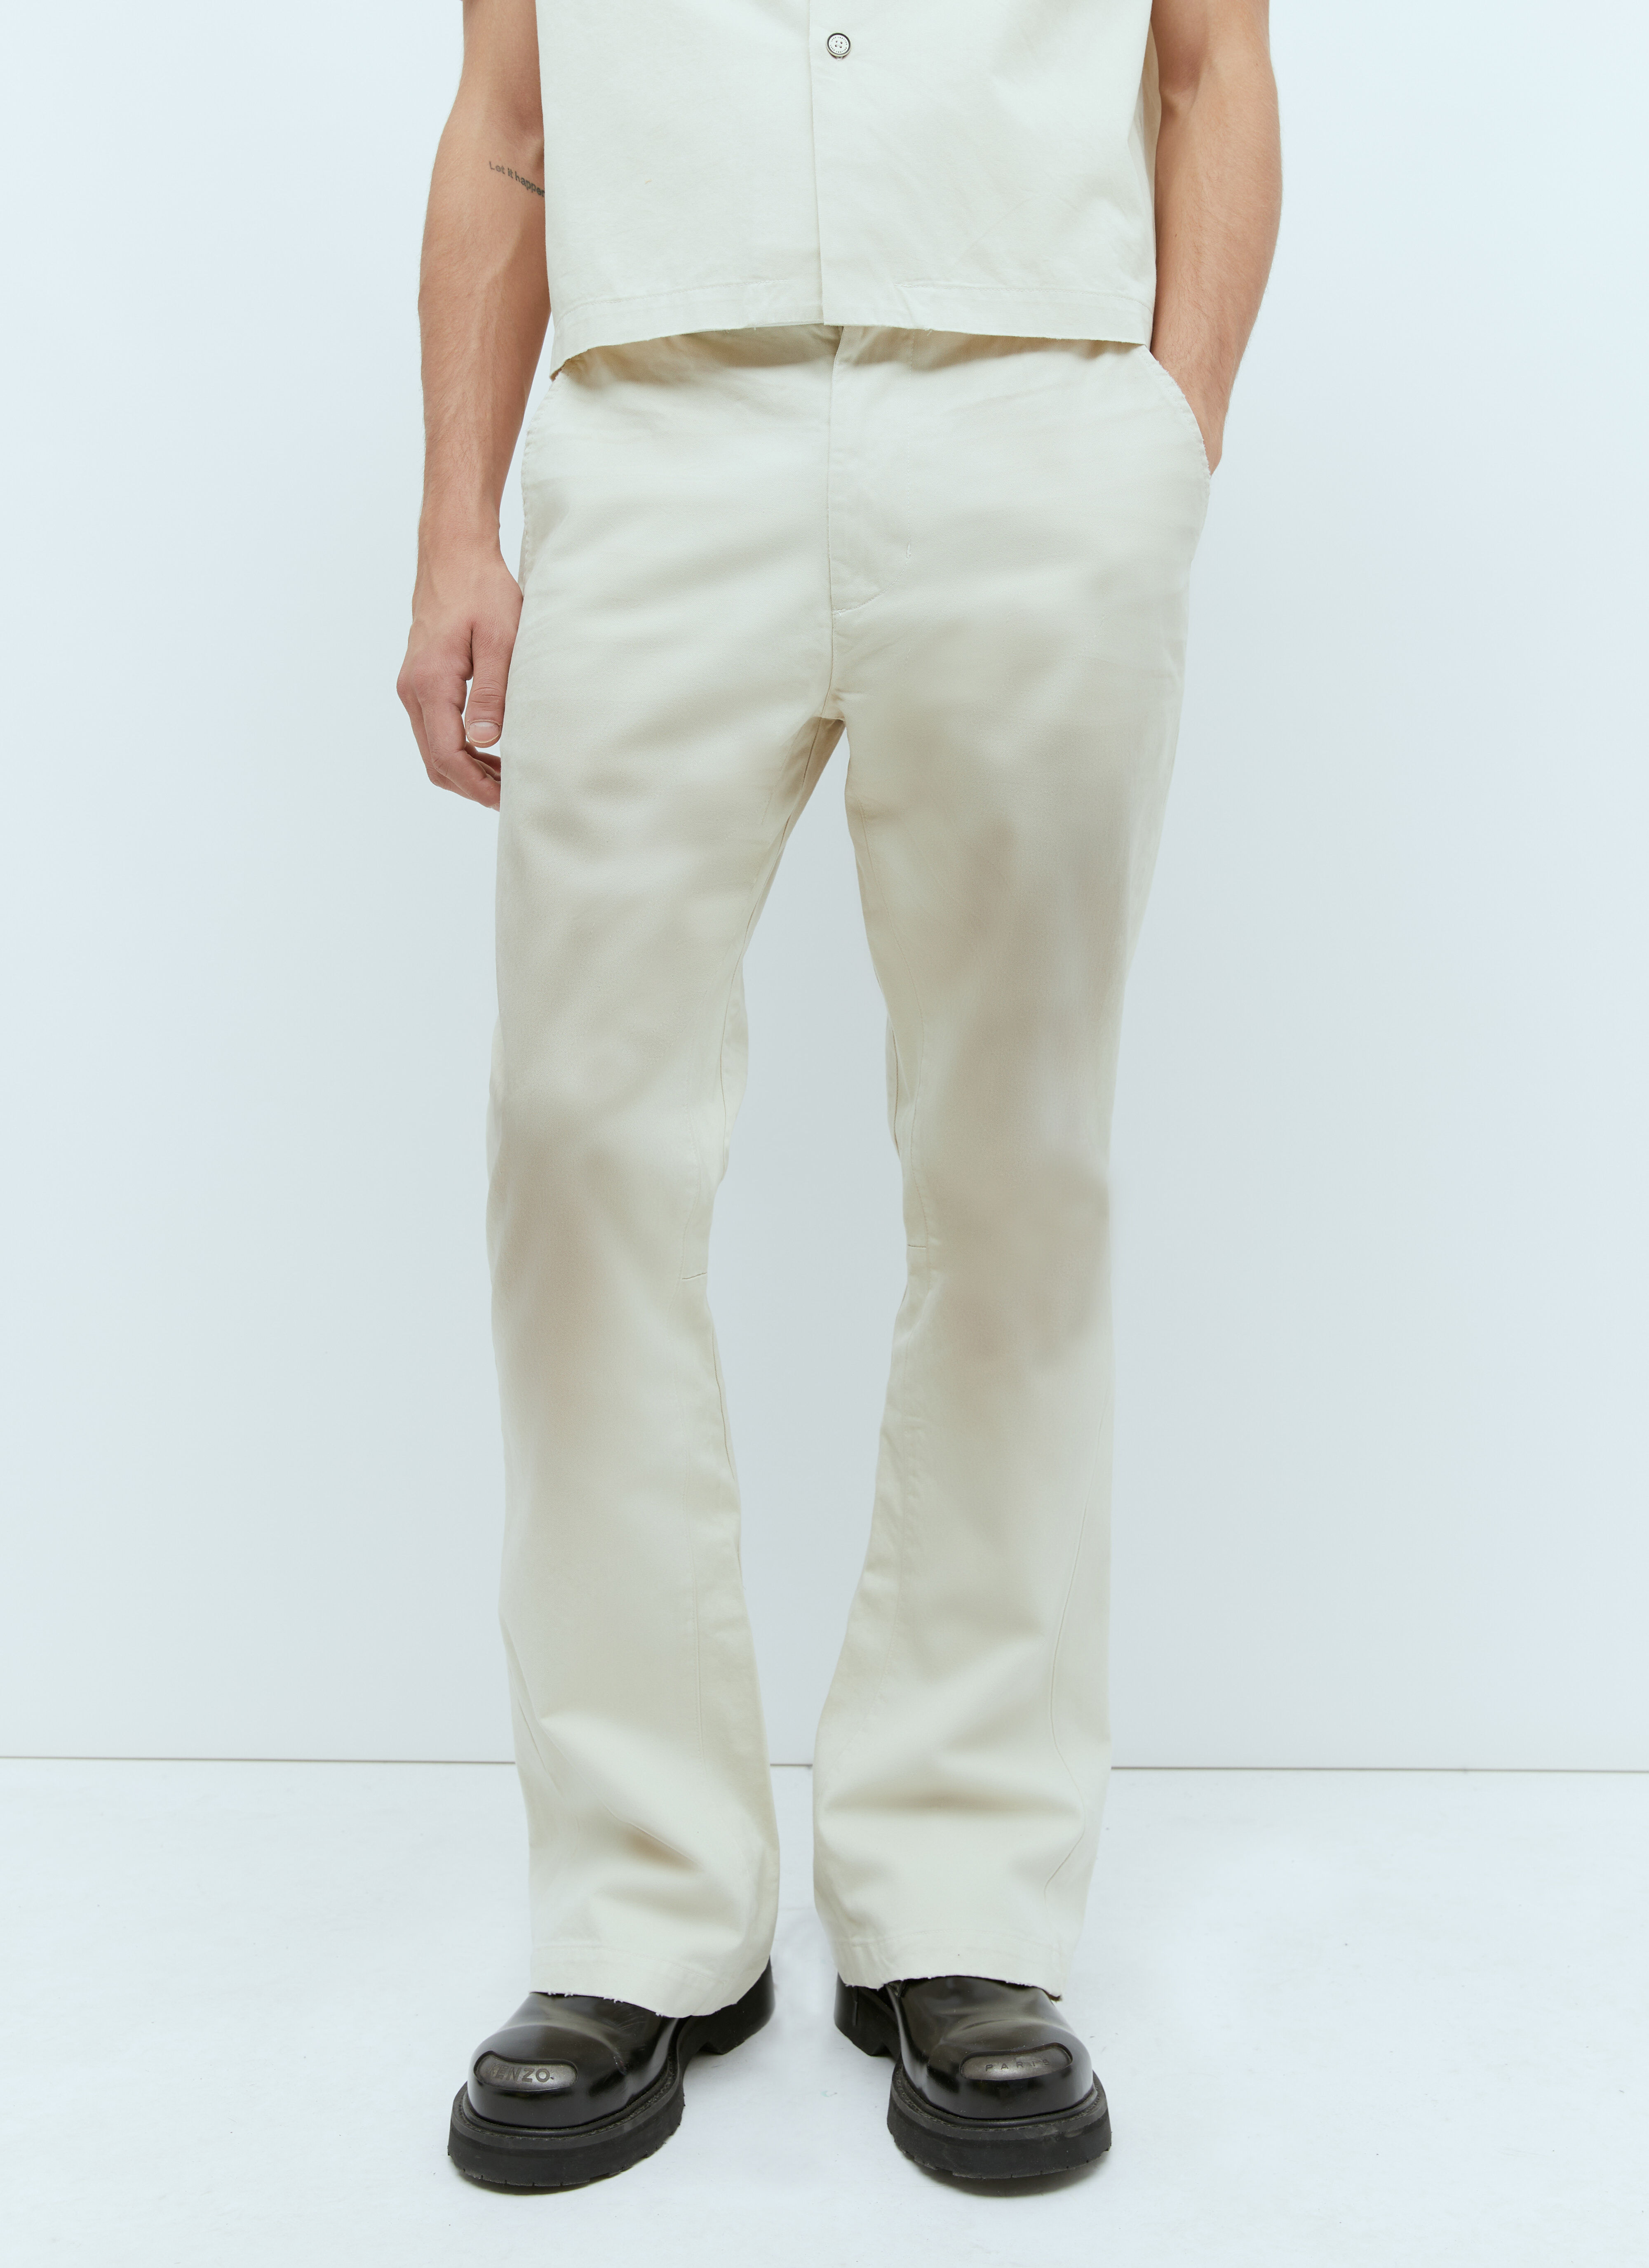 Gallery Dept. La Chino Flare Pants White gdp0153039